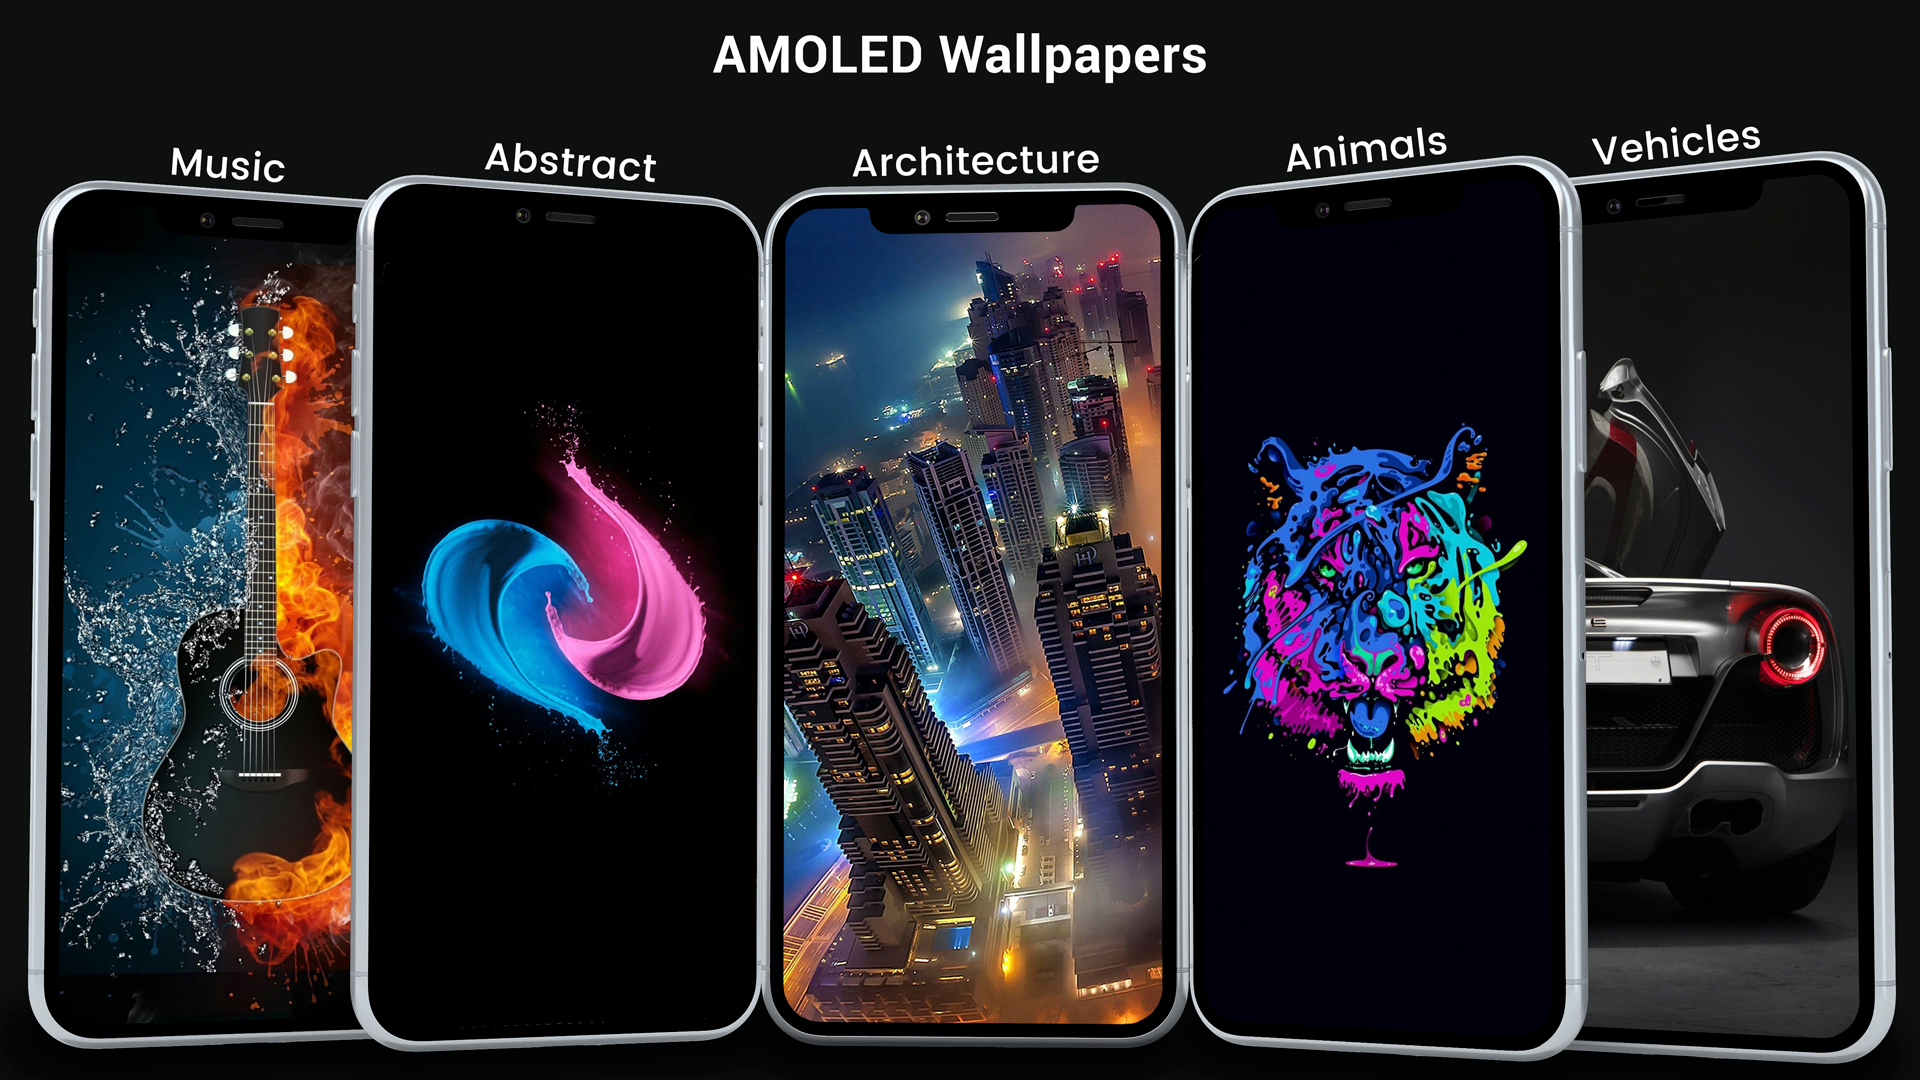 amoled wallpapers,mobile phone accessories,iphone,font,gadget,smartphone